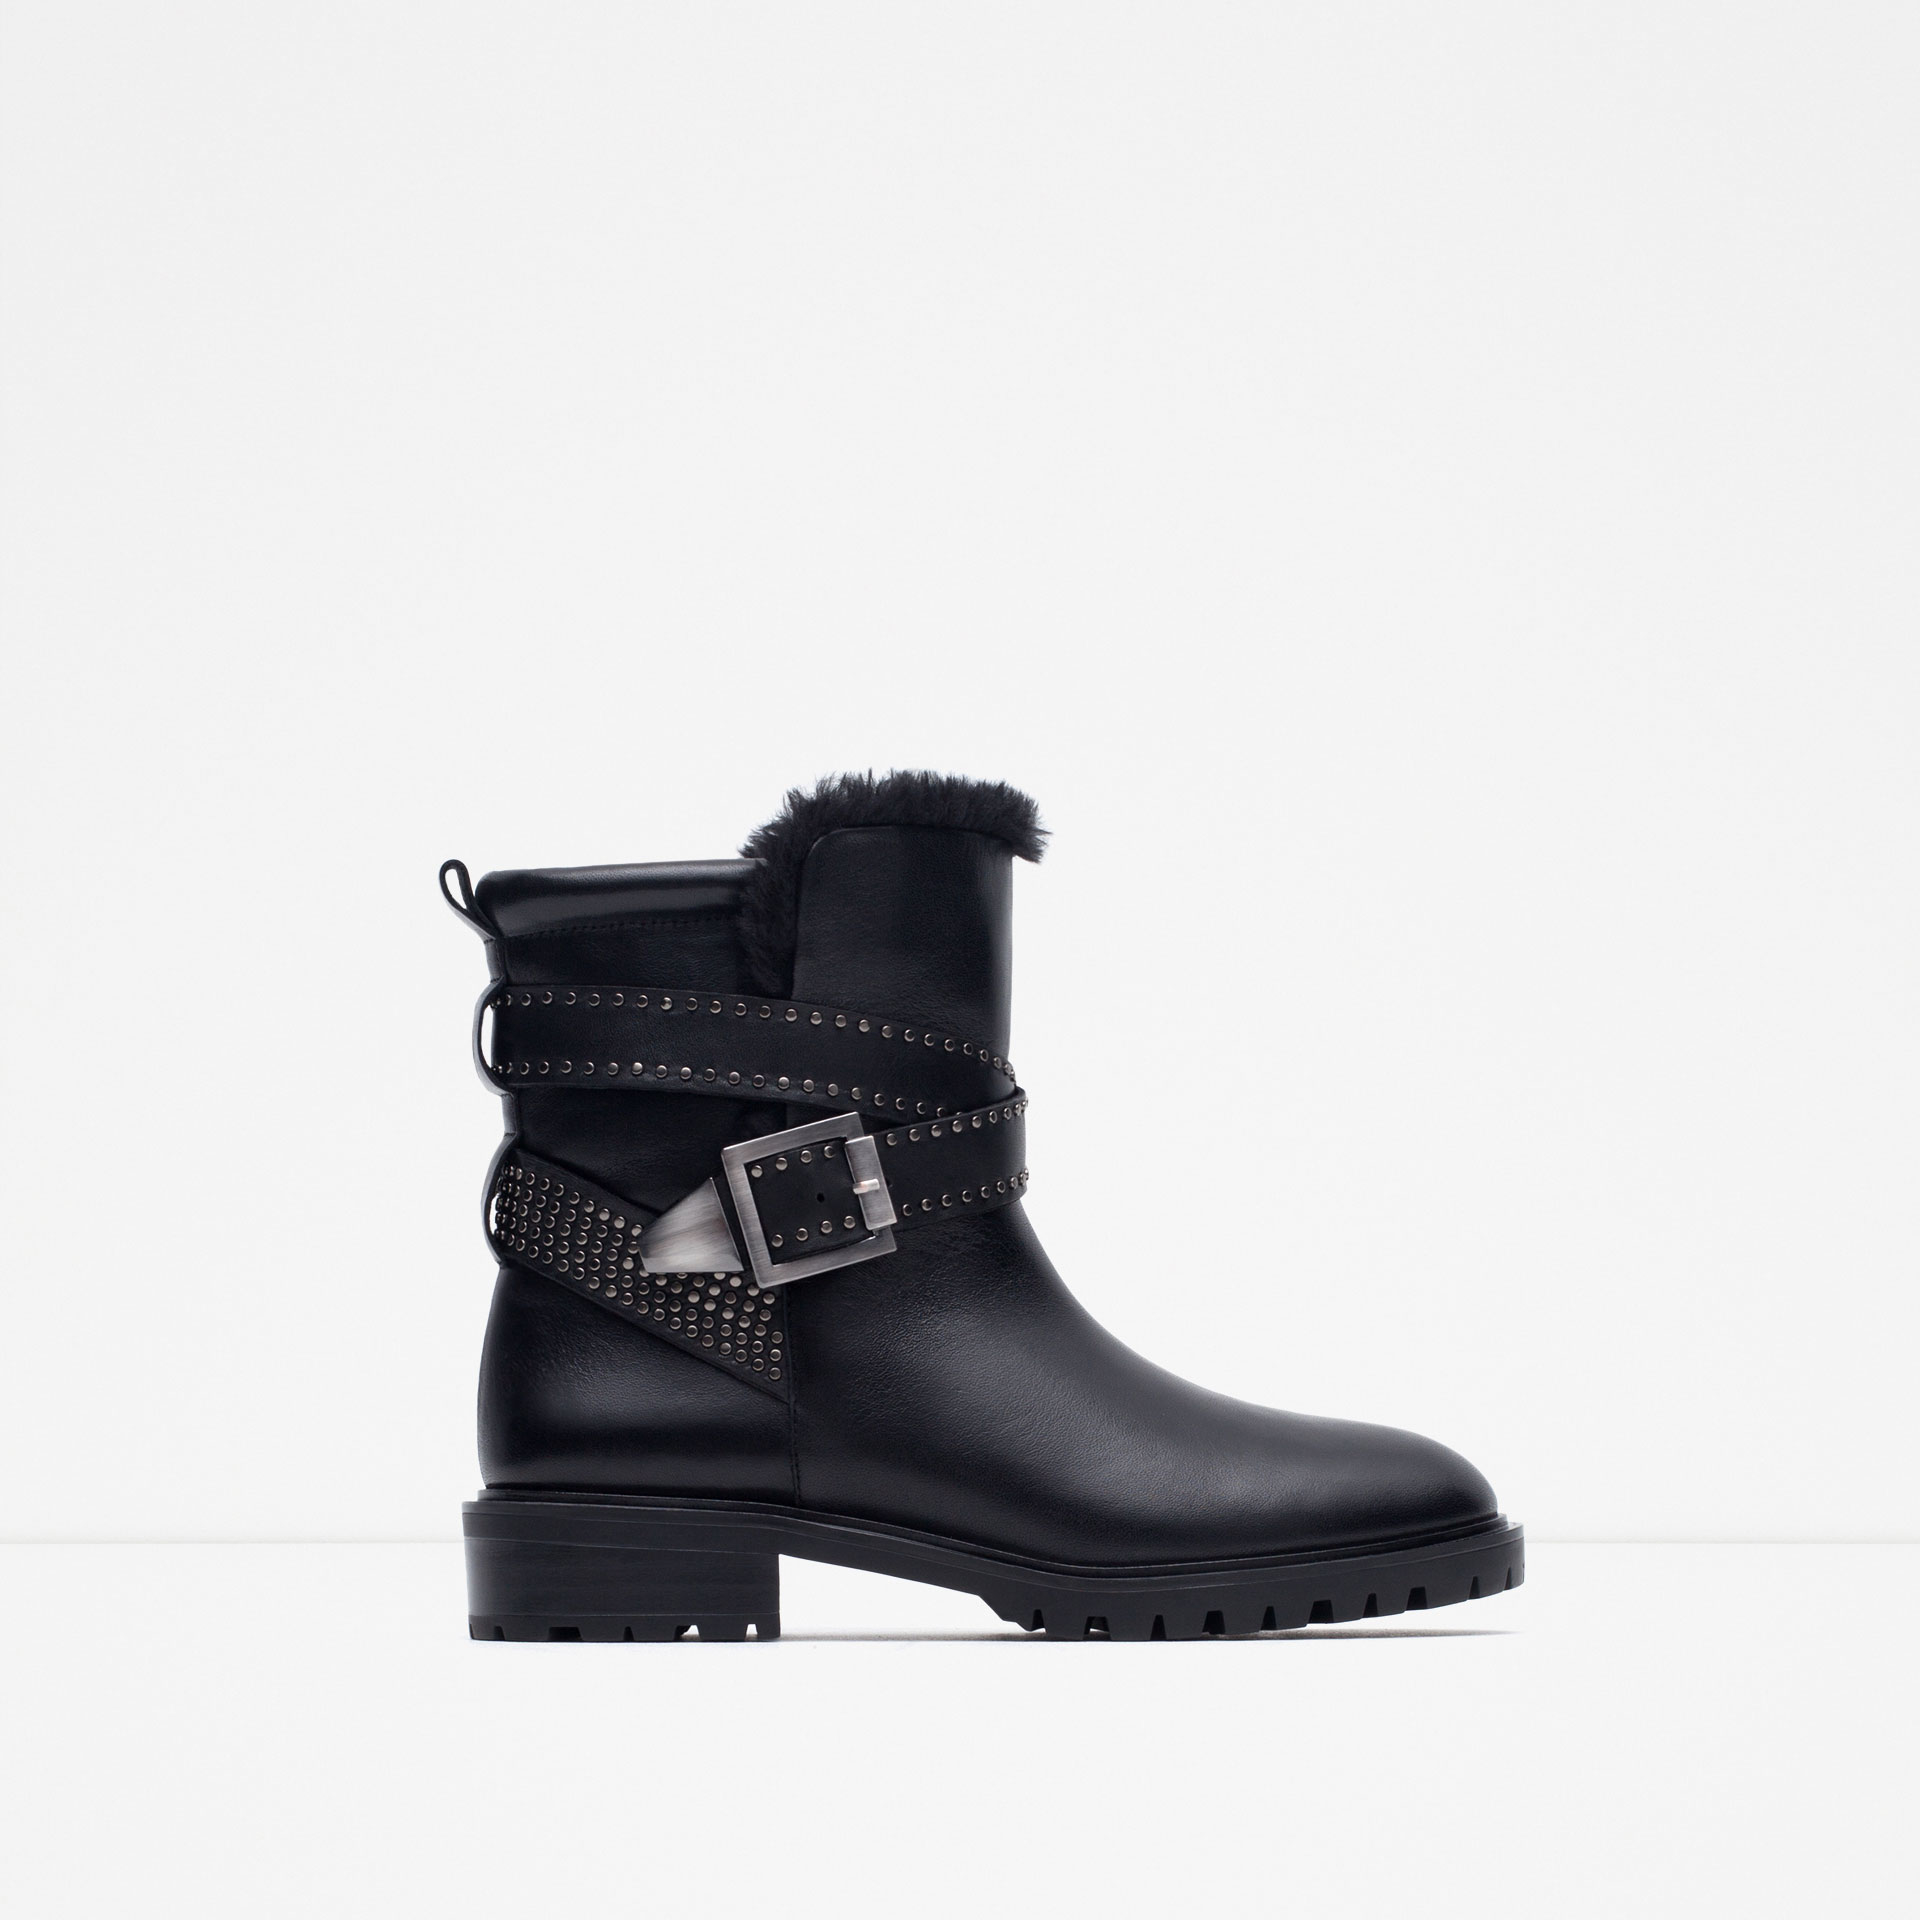 Zara Leather Biker Ankle Boots With Straps in Black | Lyst